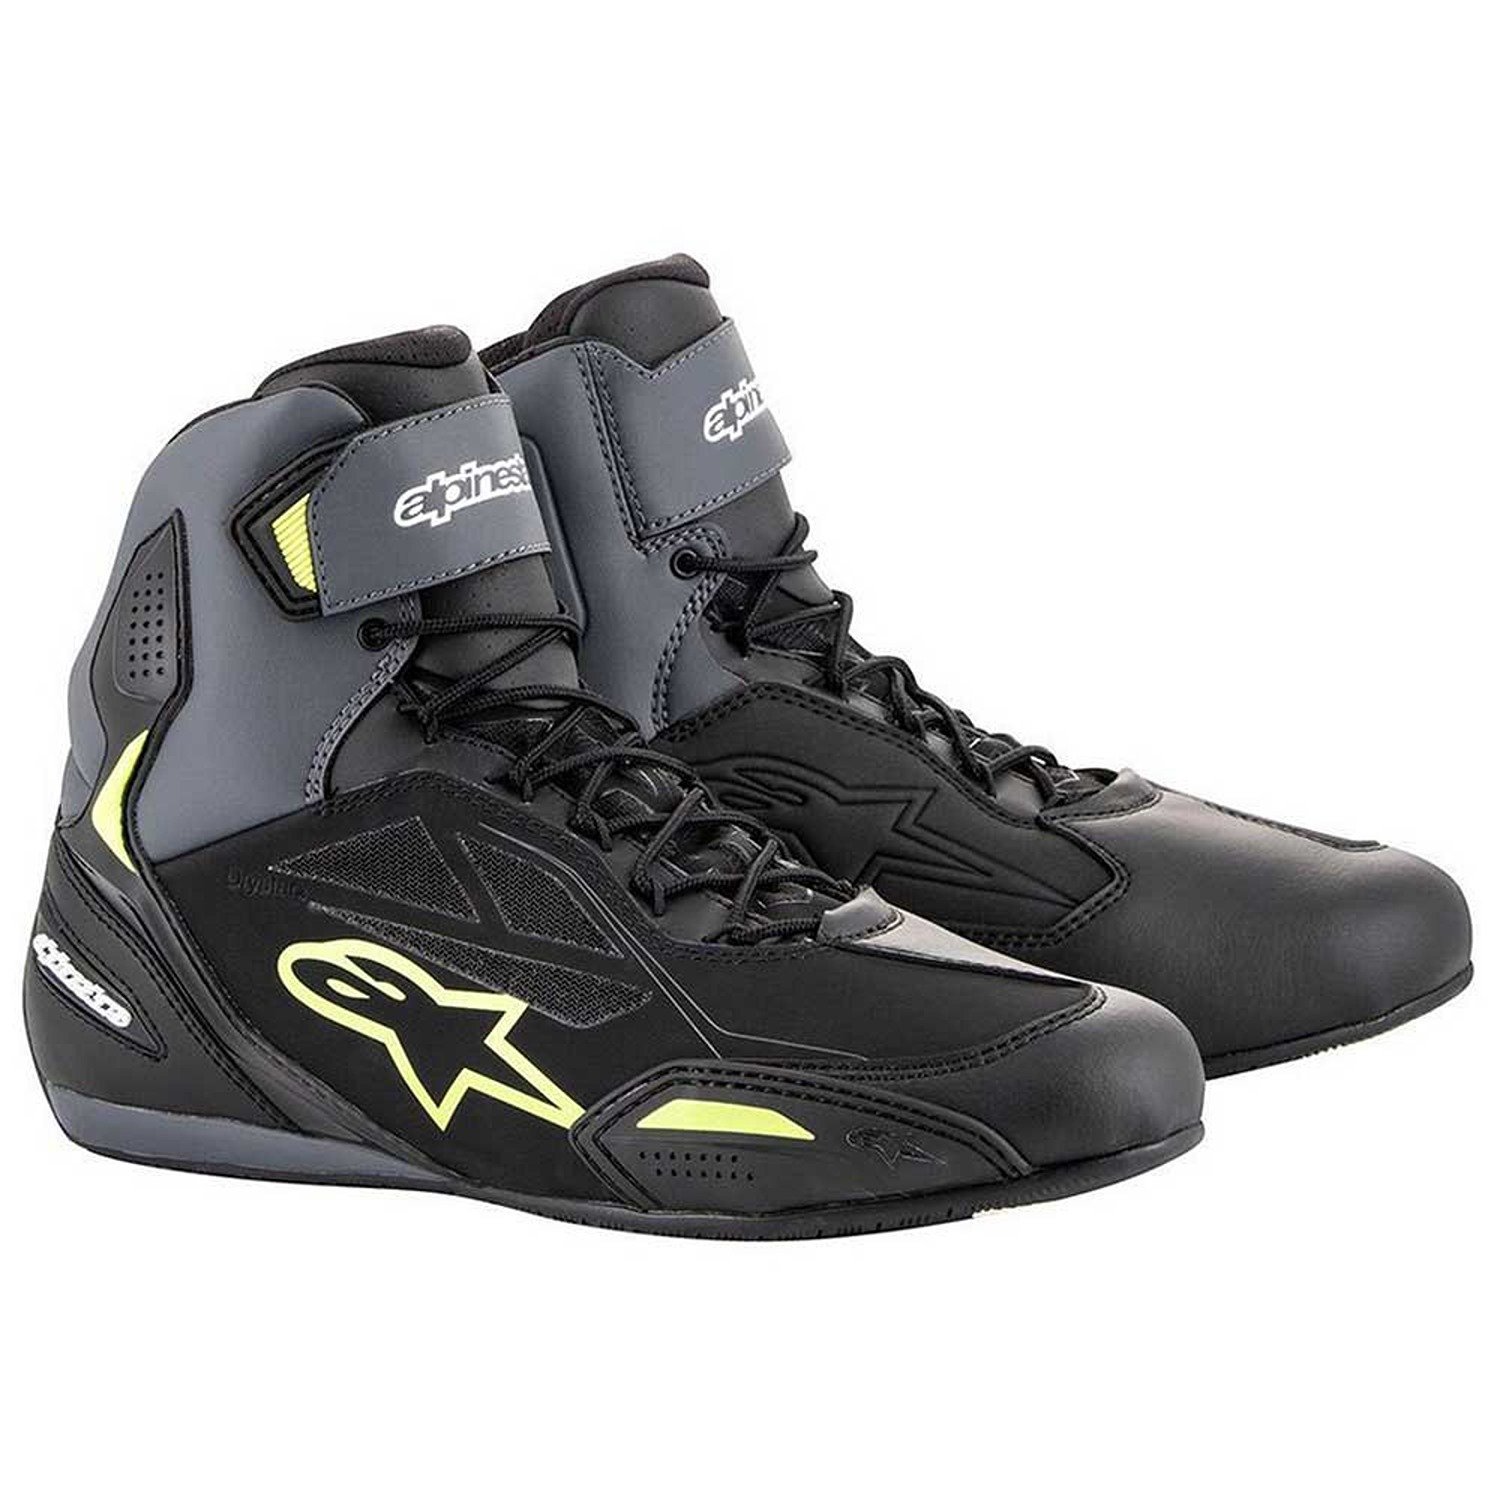 Image of Alpinestars Faster-3 Shoes Black Yellow Fluo Talla US 75